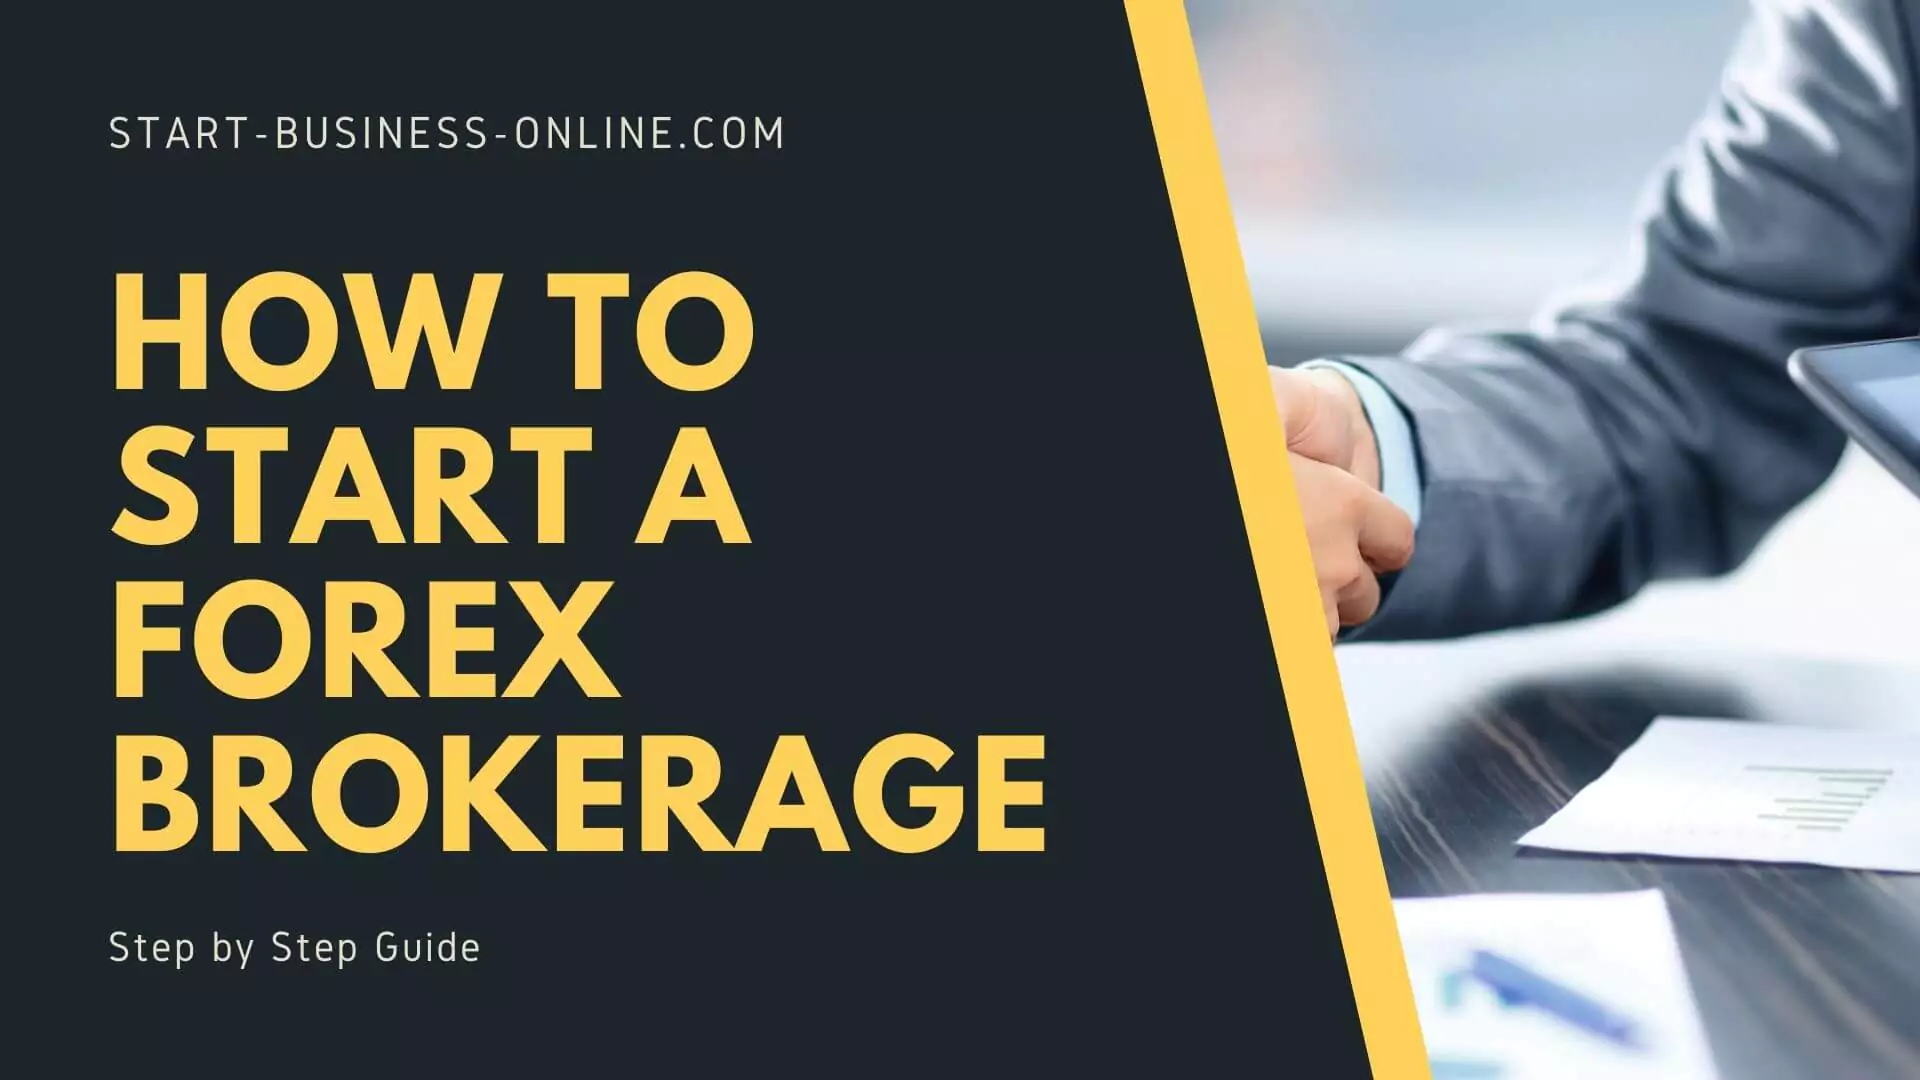 How to Start a Forex Brokerage